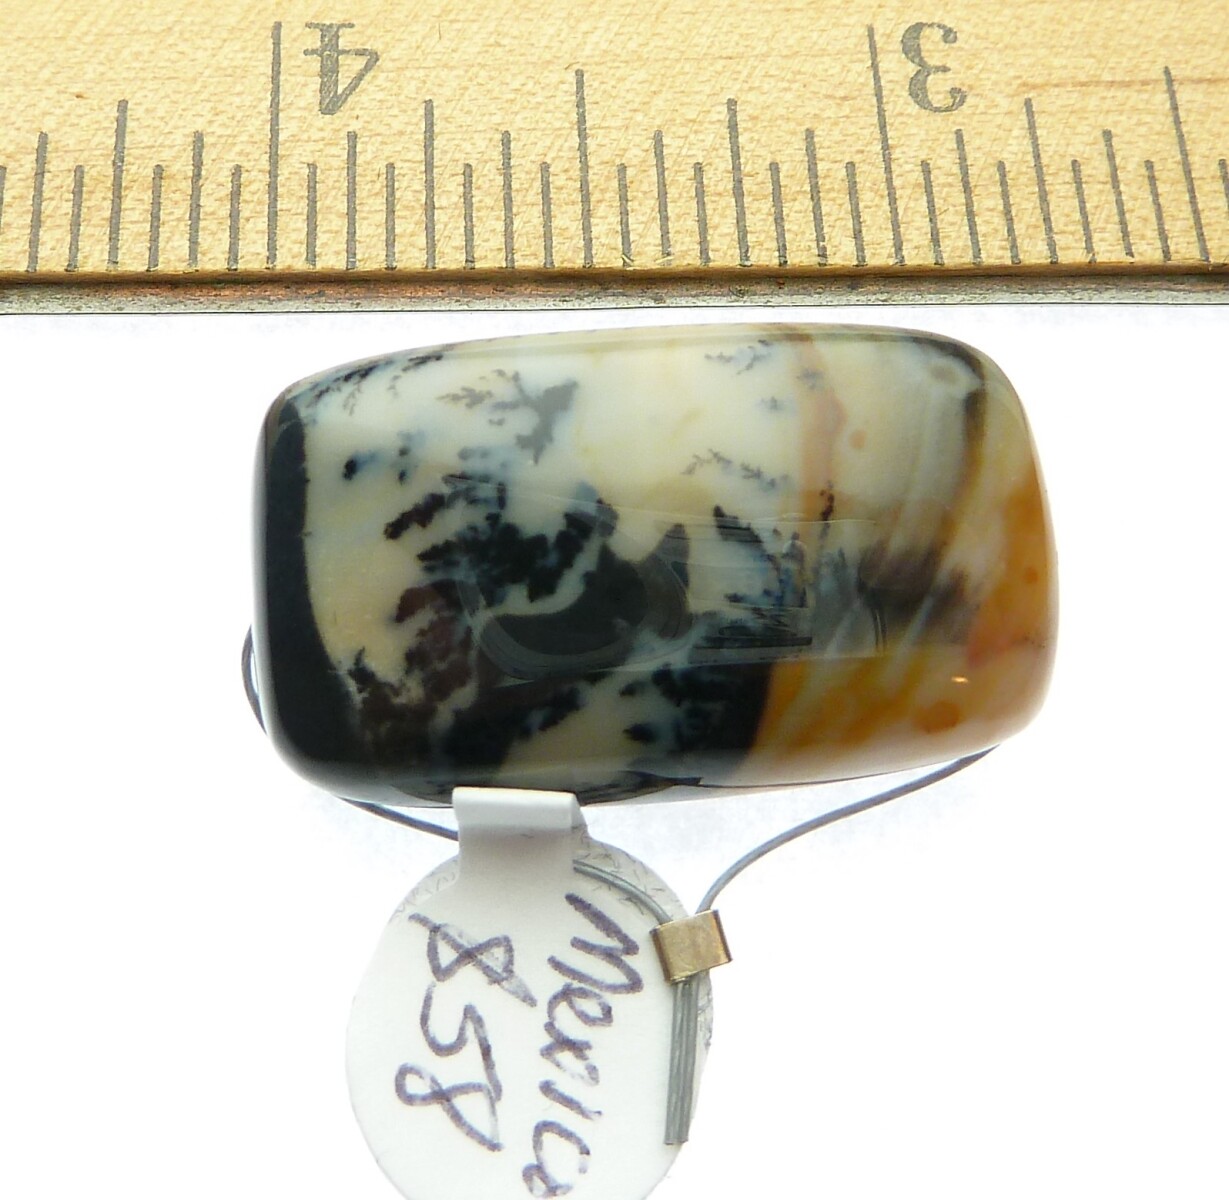 Scaled image P1010895.JPG: Item #SnowScene1, Price $58.00 Snow scene Agate pendant from Mexico. Hand cut snow scene agate pendant. Bead is 28 mm long by 16 mm wide. Drill hole size is about 3.0 mm. This stone is drilled vertically. This bead has a creamy white background color with black dendrites and a little amber color at one end of this bead.
P1010942.JPG ---- Item #MossAgate1, Price $45.00 Designer handcut Moss Agate pendant. Bead is 44 mm long by 21 mm wide. Drill hole size is about 2.0 mm. This stone is drilled horizontally.� 